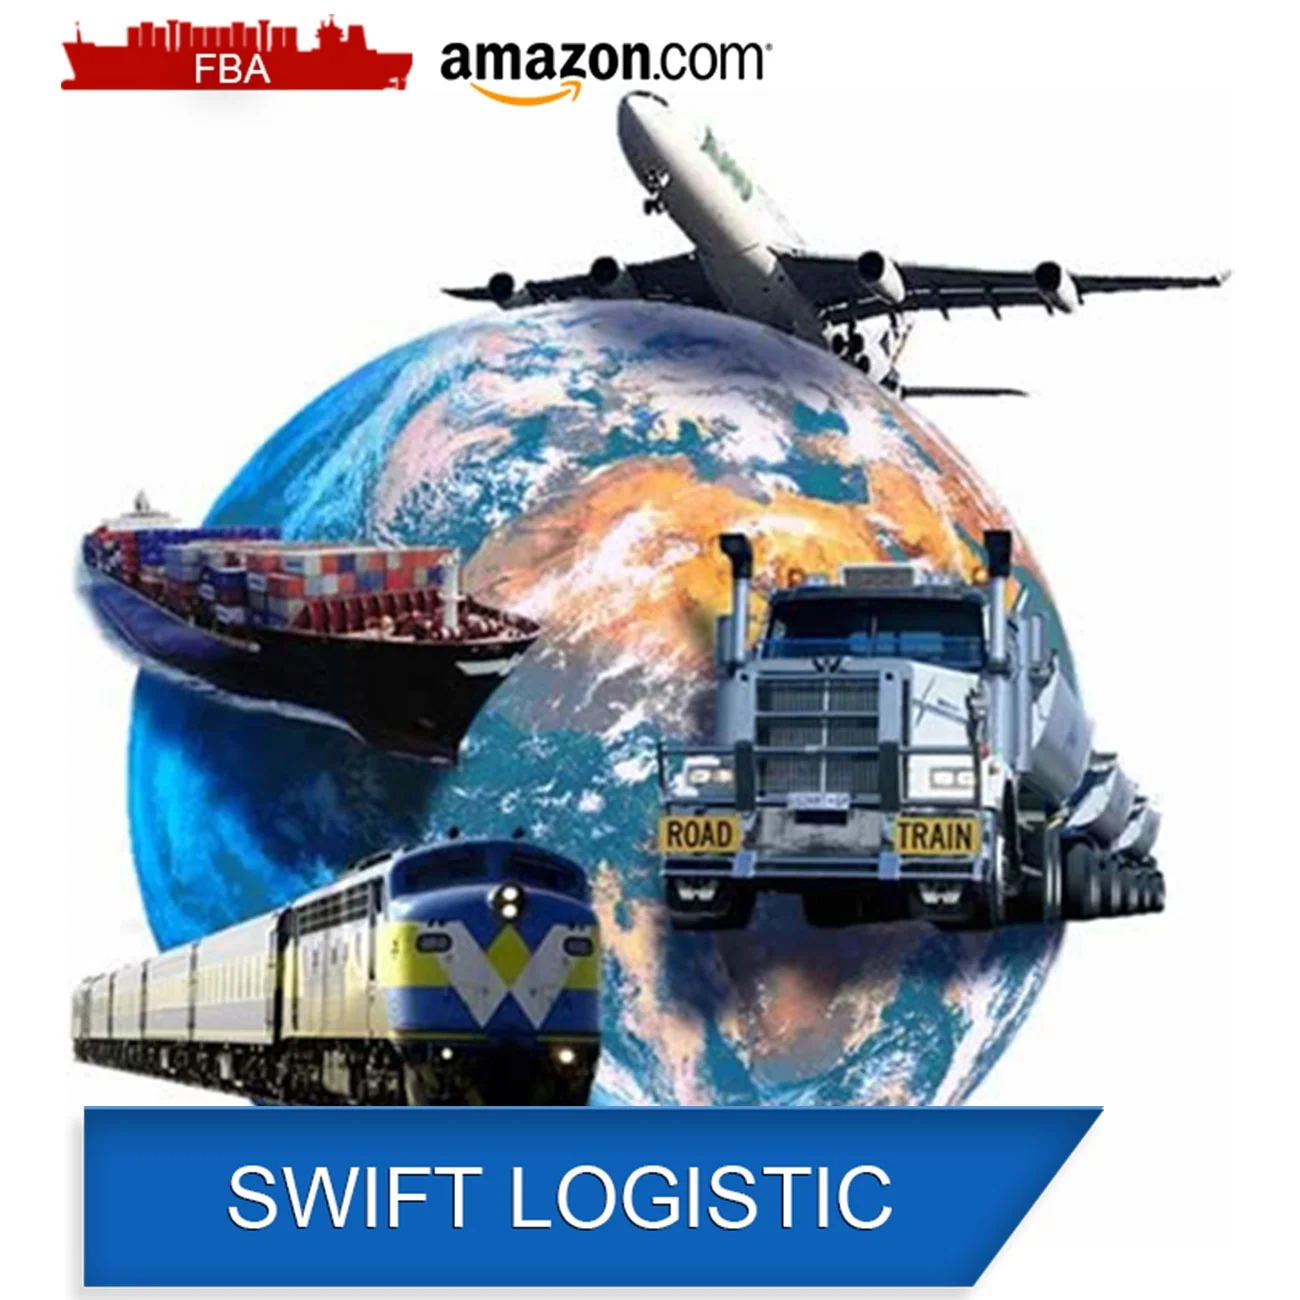 Amazon Fba Door to Door Delivery Service Fba Freight Forwarder International Air Freight Rates China Shipping Agent to USA (1600599378777)